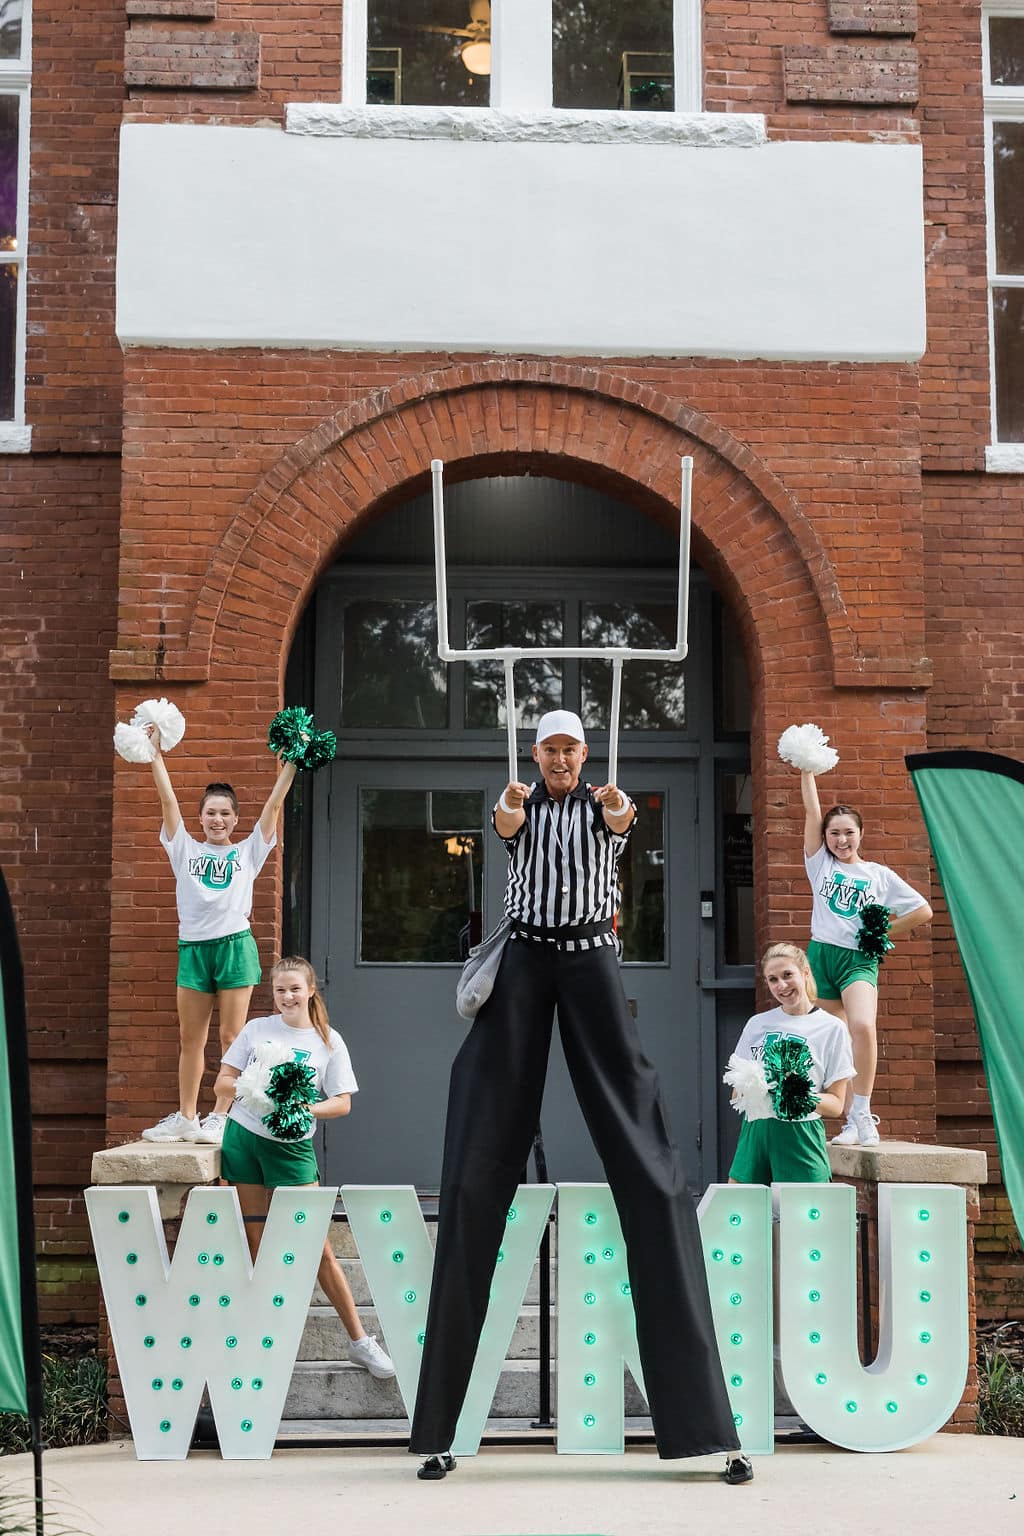 four cheerleaders on the steps of old school house with wvmu marquee letters in front of them and man wearing stilts dresses as a referee in front of them